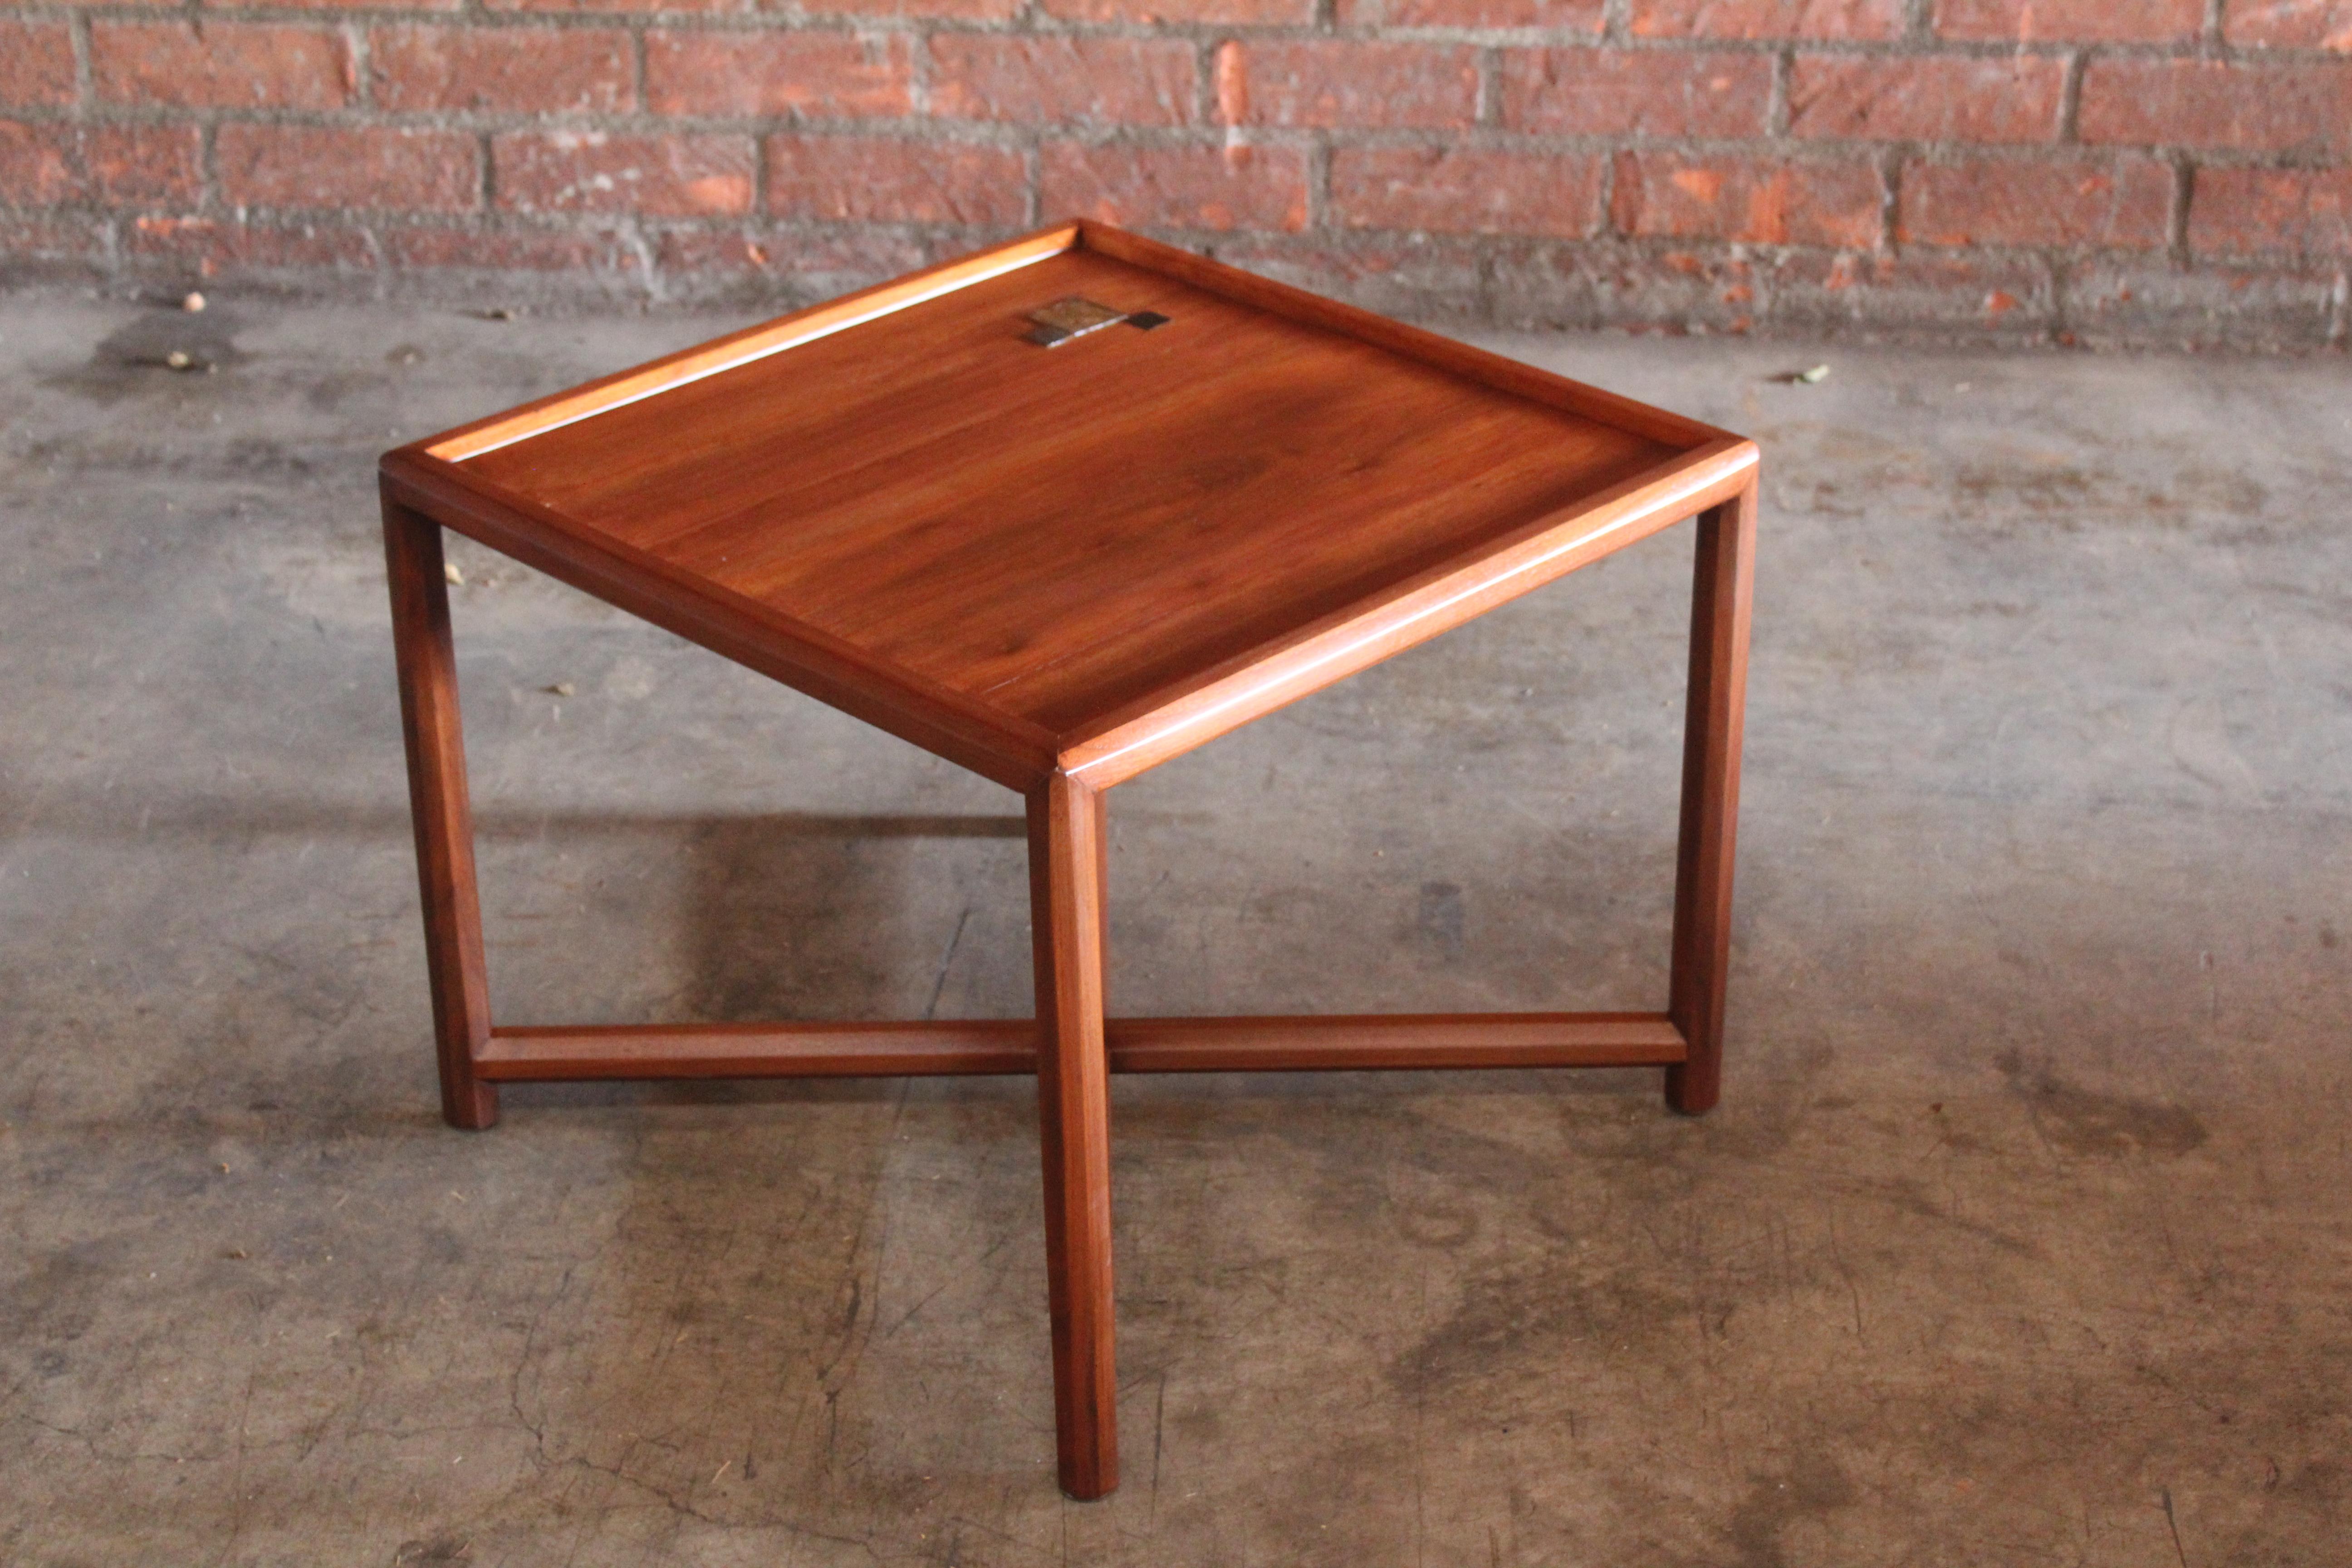 Walnut End Table with Tiffany Tiles by Edward Wormley for Dunbar, 1950s For Sale 2